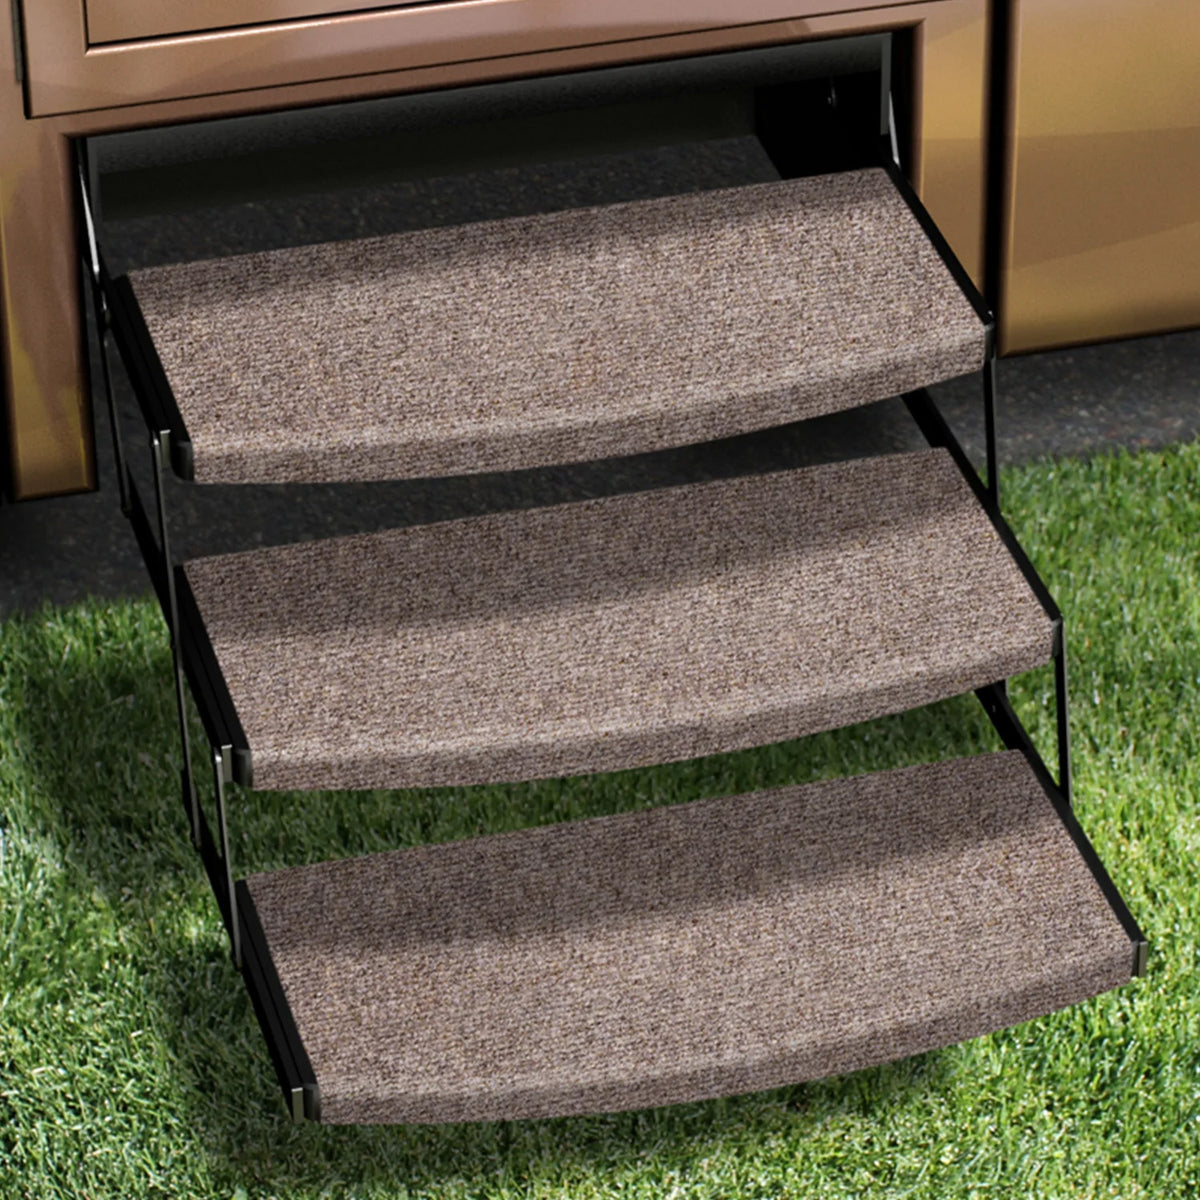 Prest-O-Fit 2-4135 Outrigger Universal RV Step Rug - 22" Wide, Chocolate Brown, 3-Piece Set